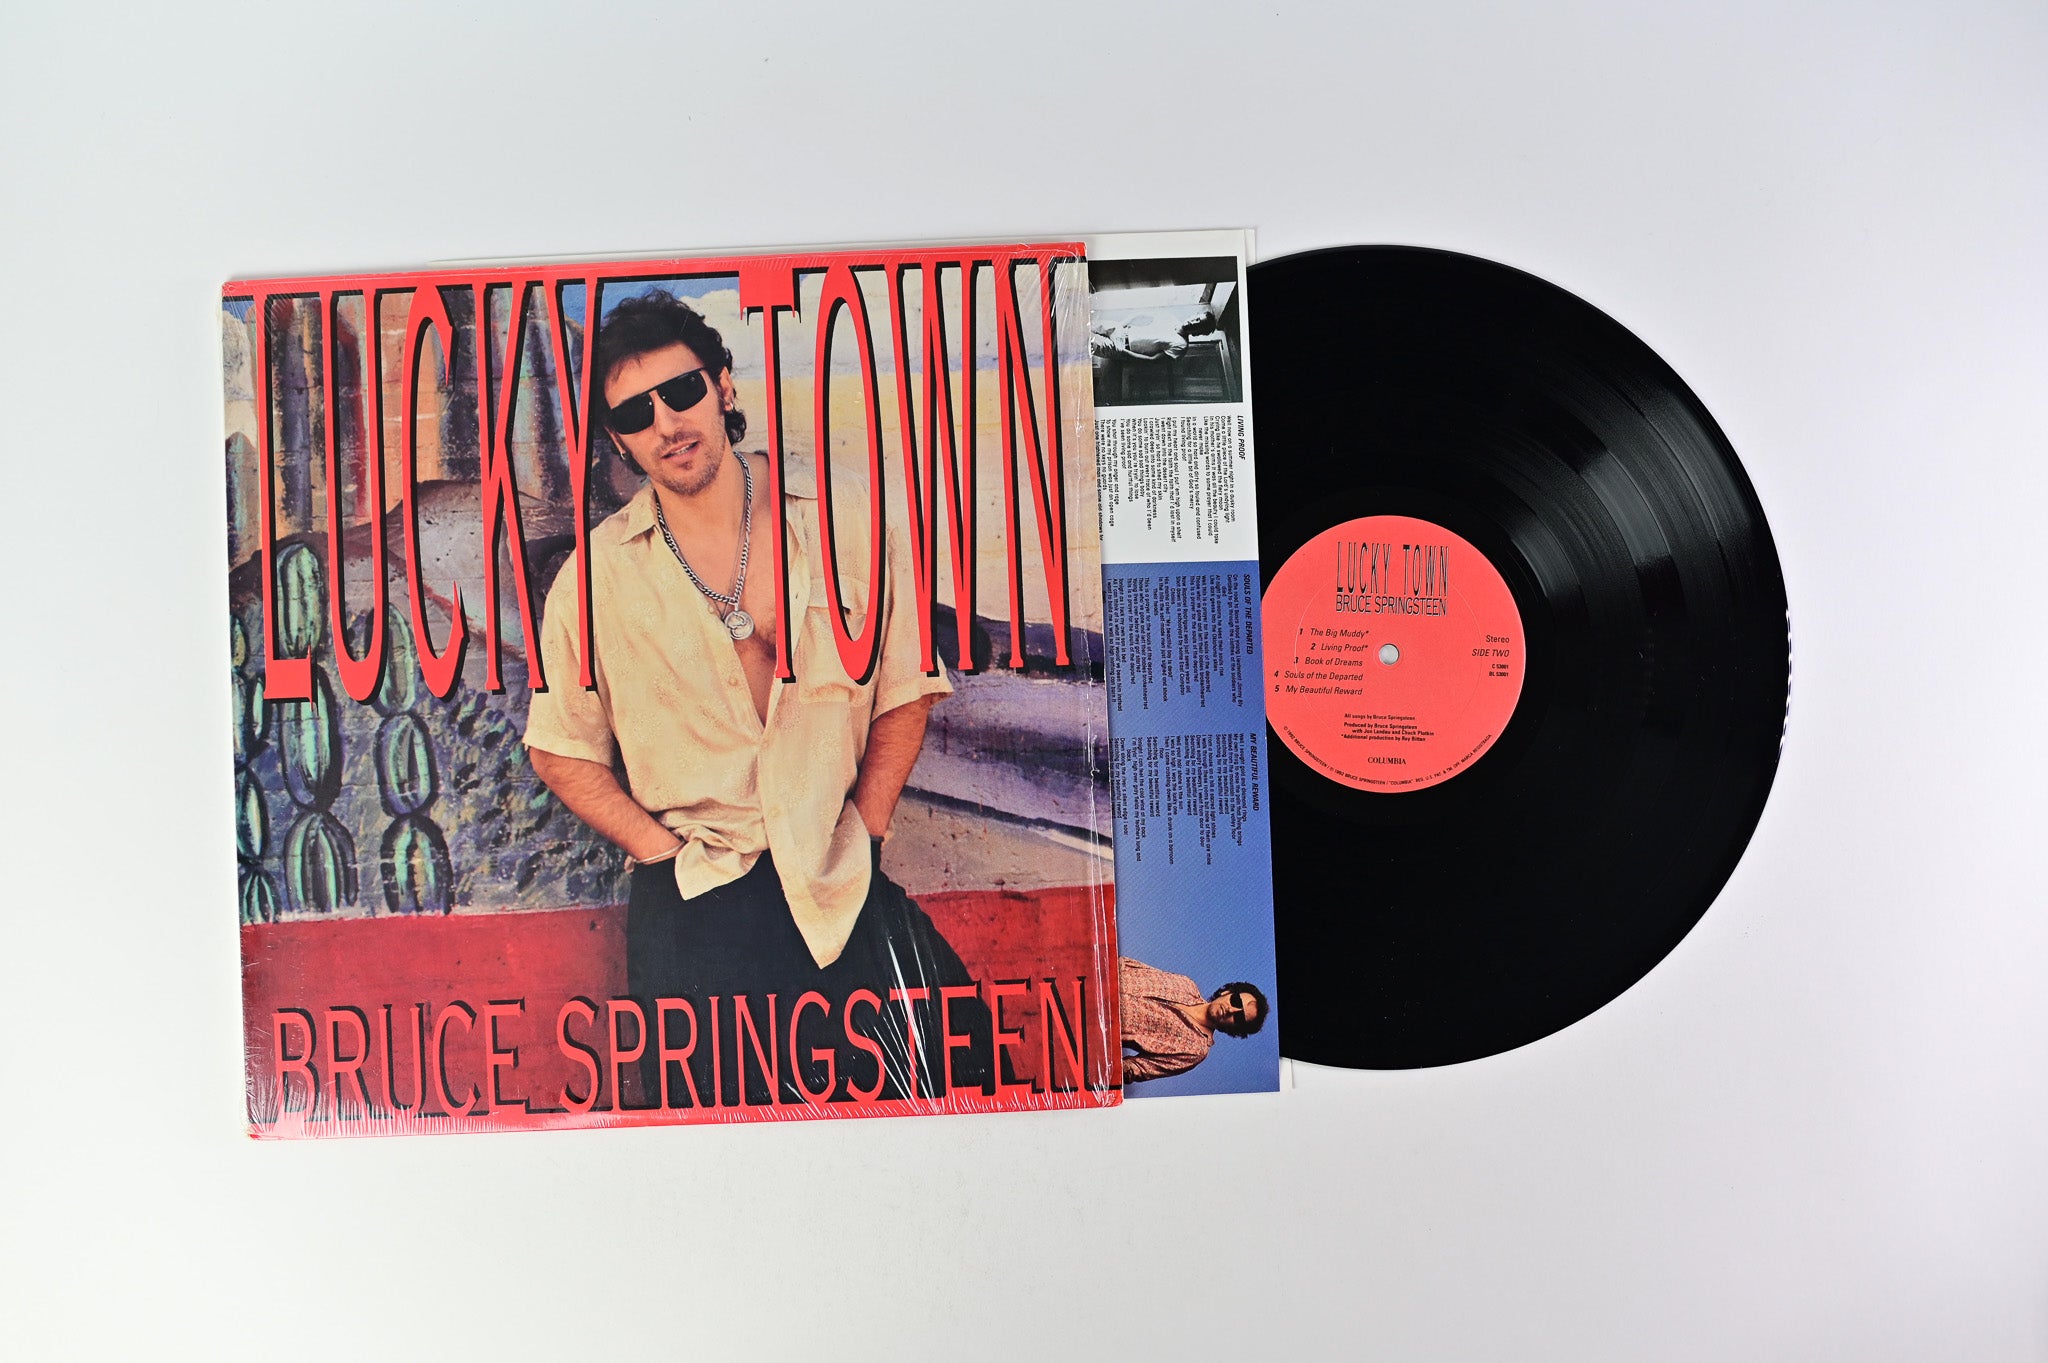 Bruce Springsteen - Lucky Town on Columbia